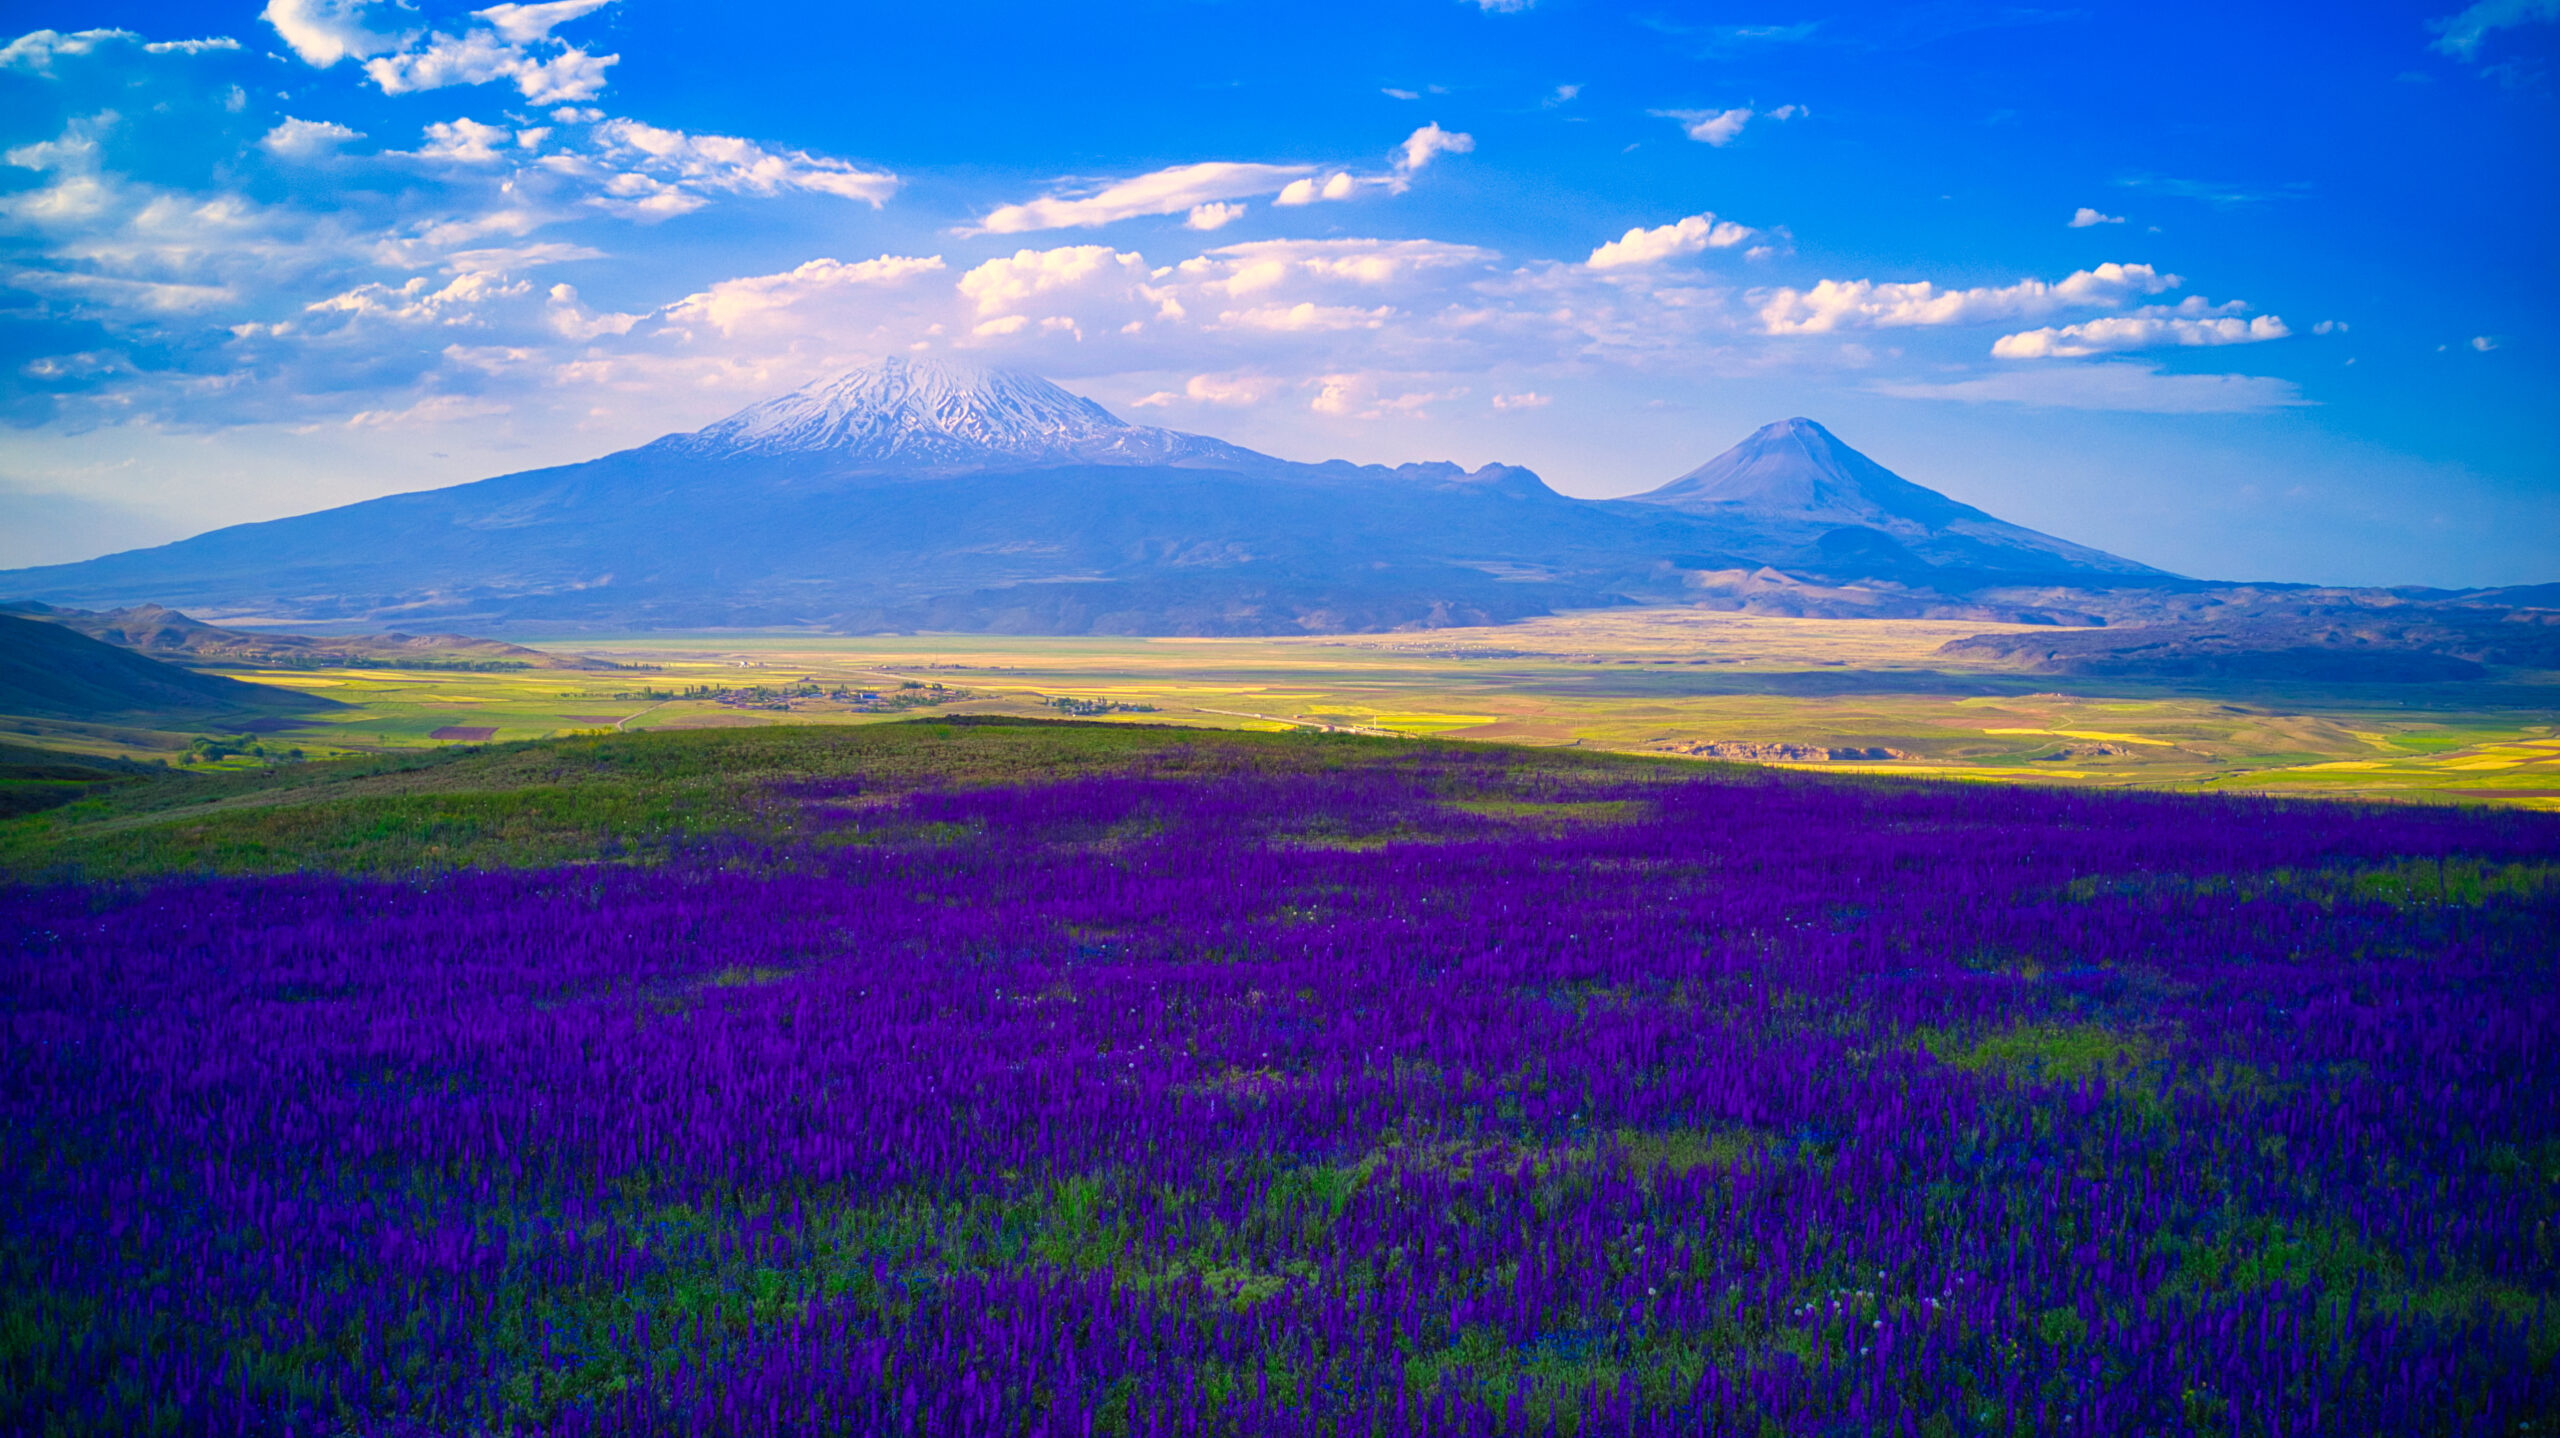 Mount Ararat with springtime flowers blooming.